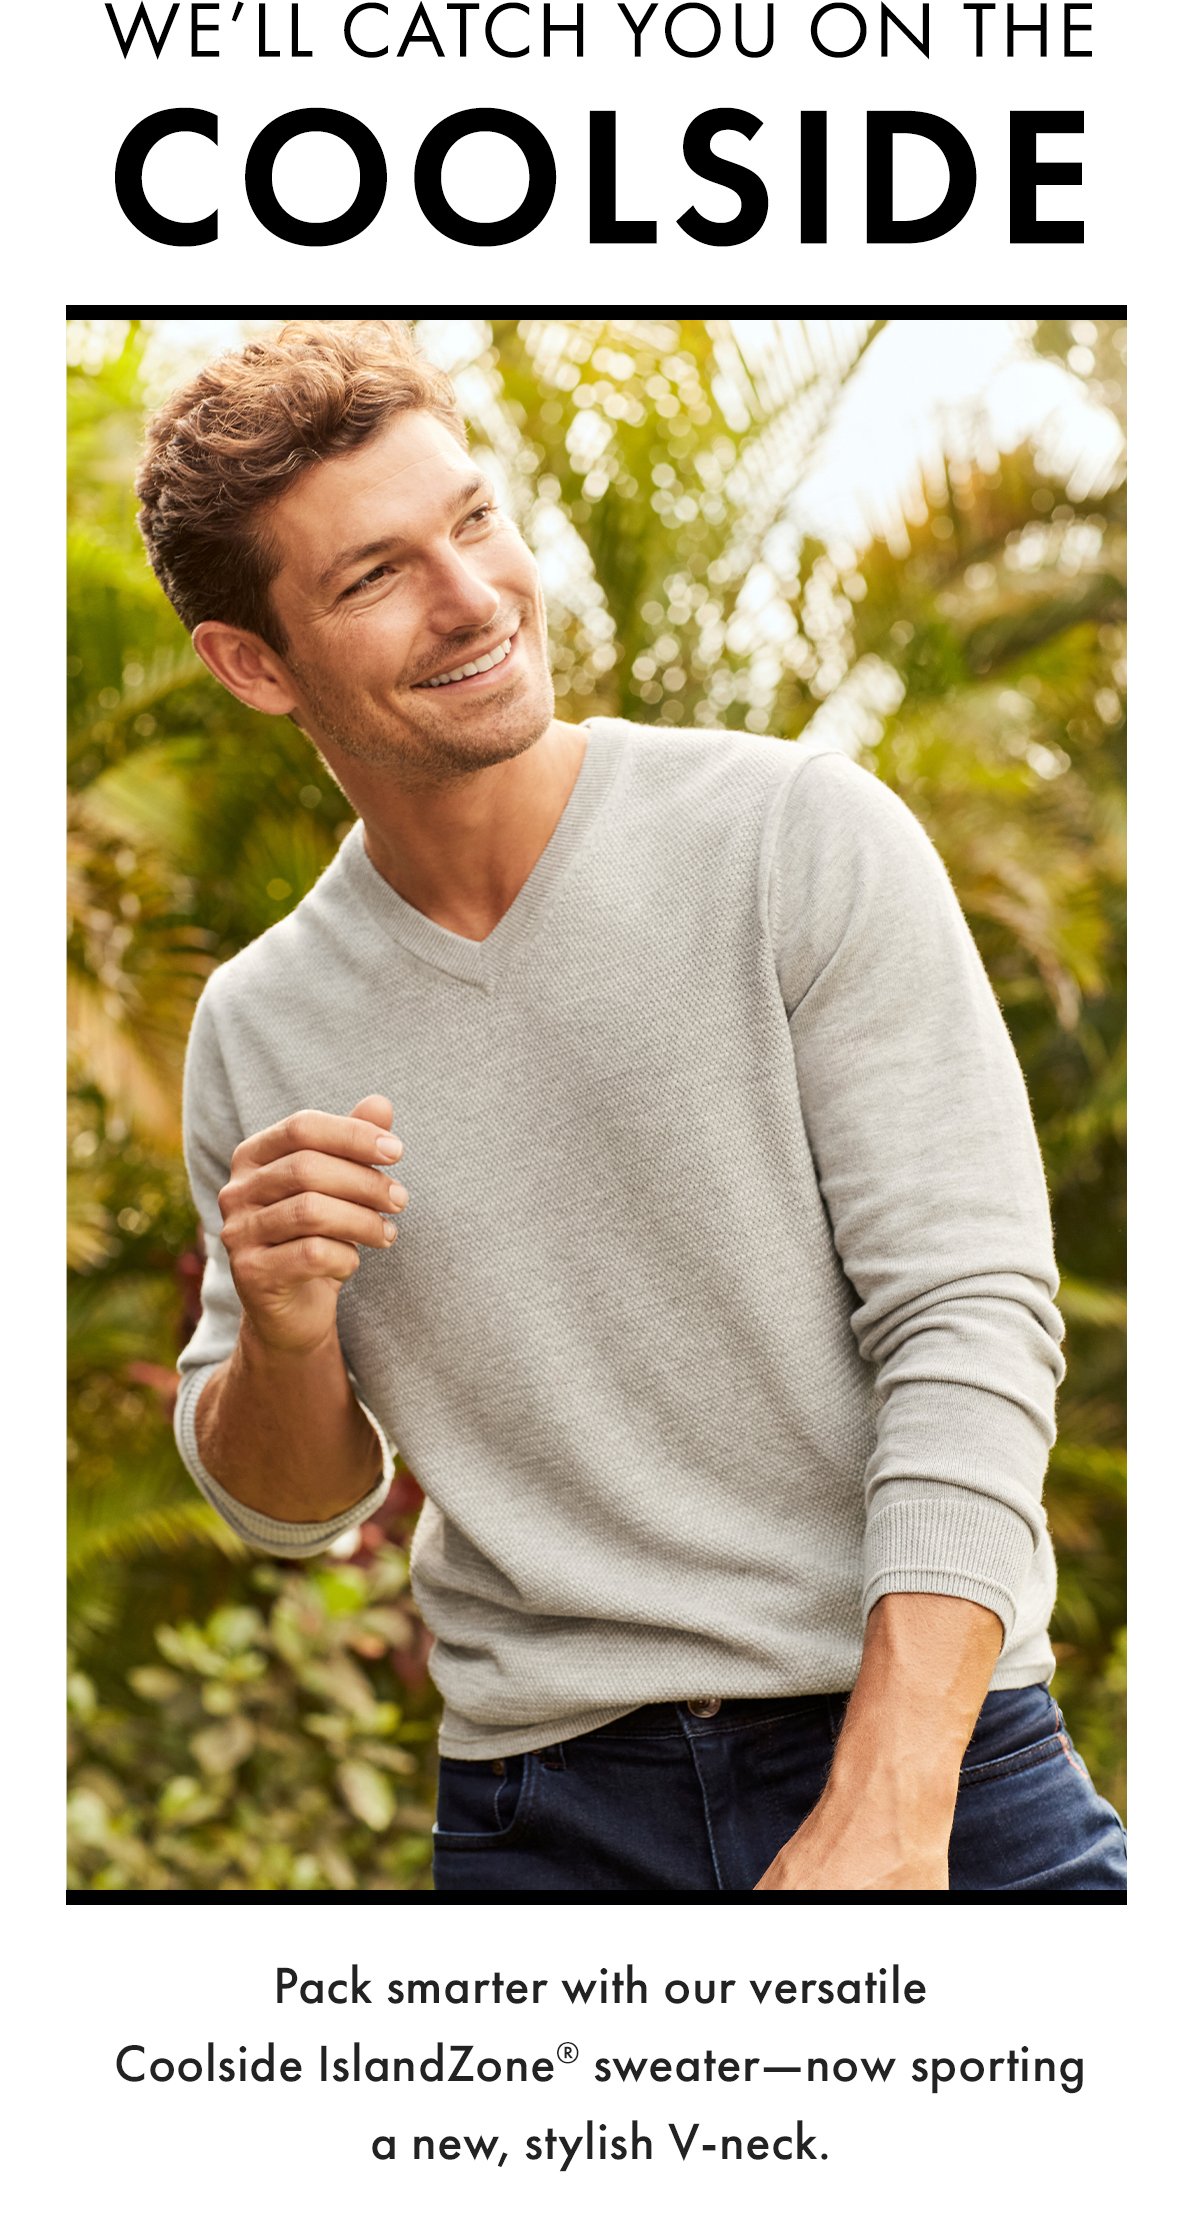 We'll catch you on the coolside. Pack smarter with our versatile Coolside IslandZone sweater - now sporting a new, stylish V-neck.